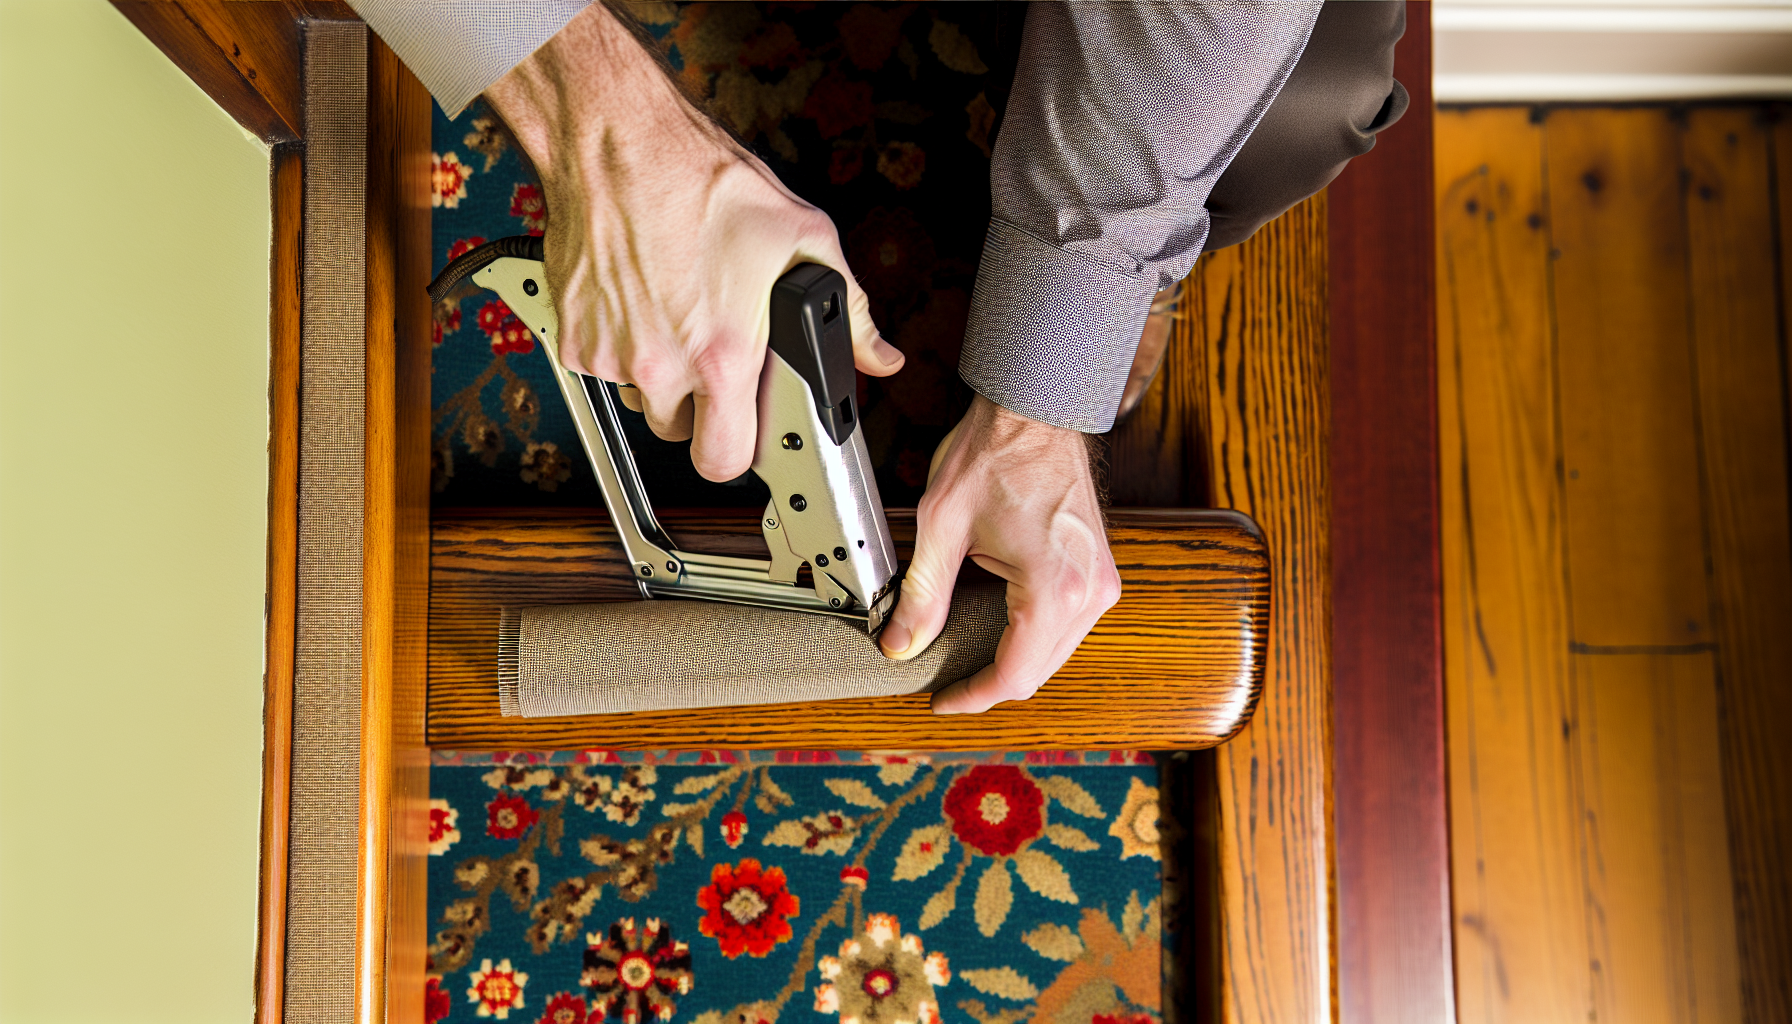 Staple gun being used to secure a stair runner